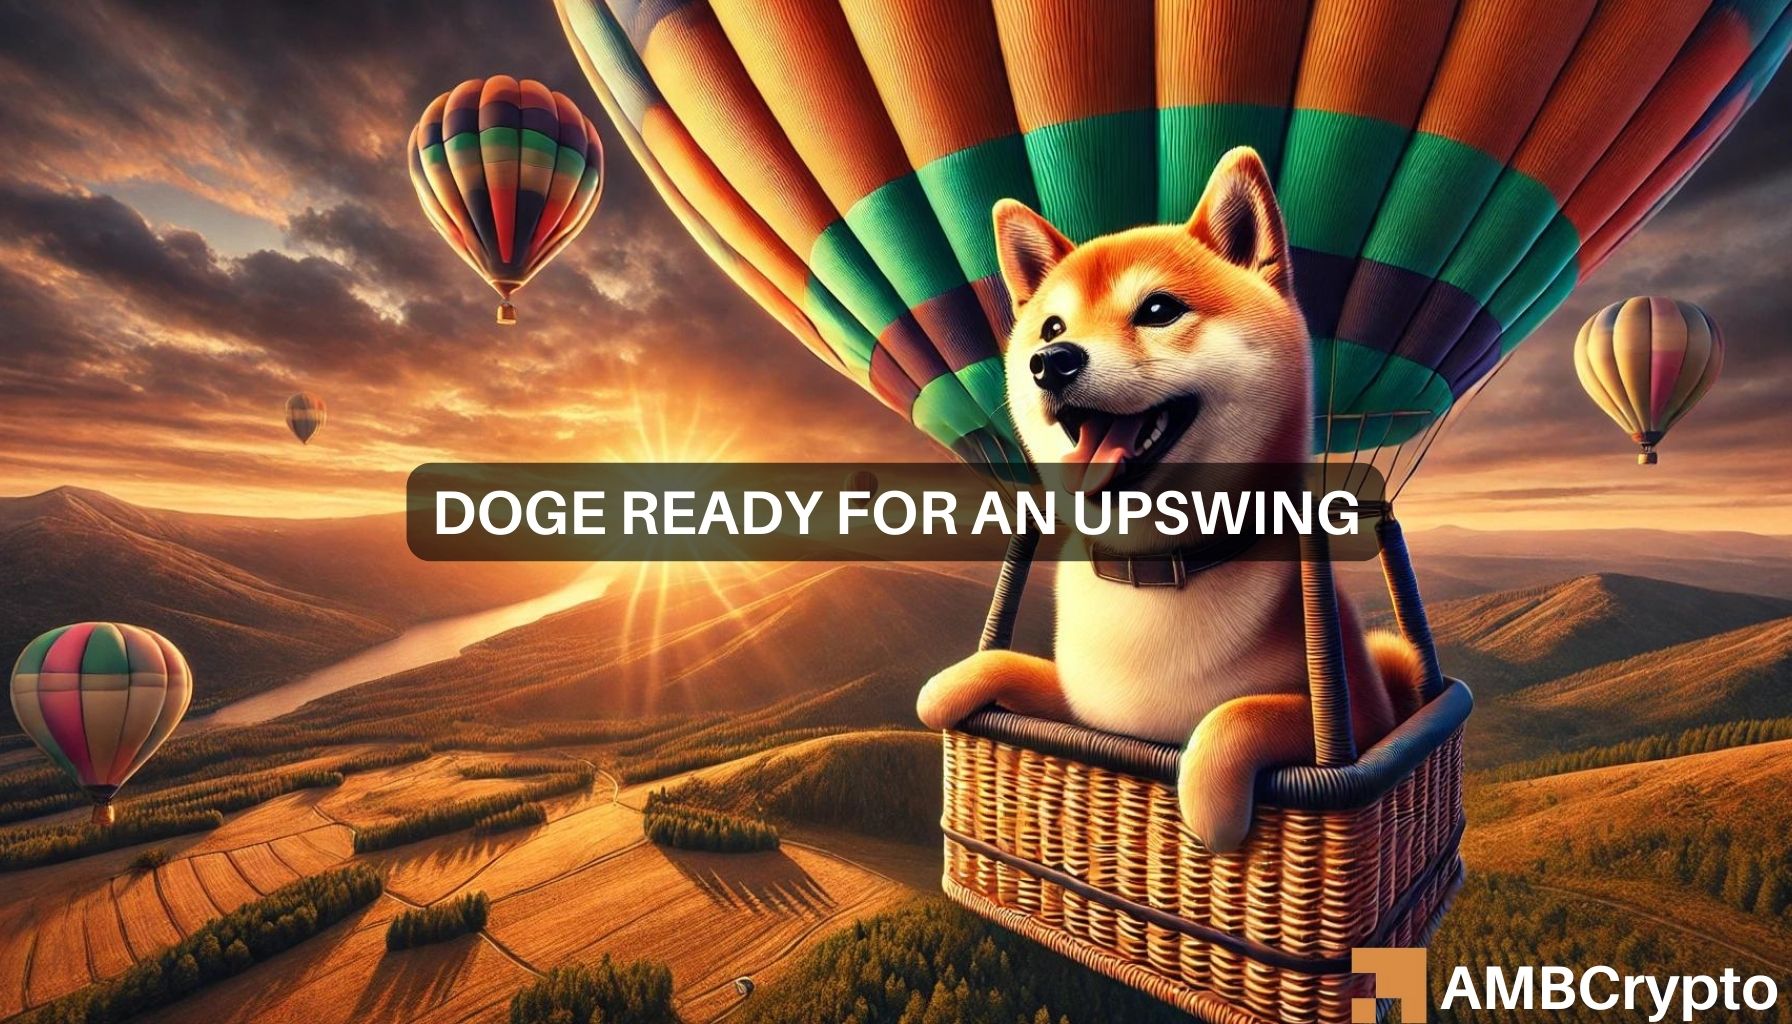 Dogecoin sees a bullish breakout – +40% gains likely for DOGE holders?